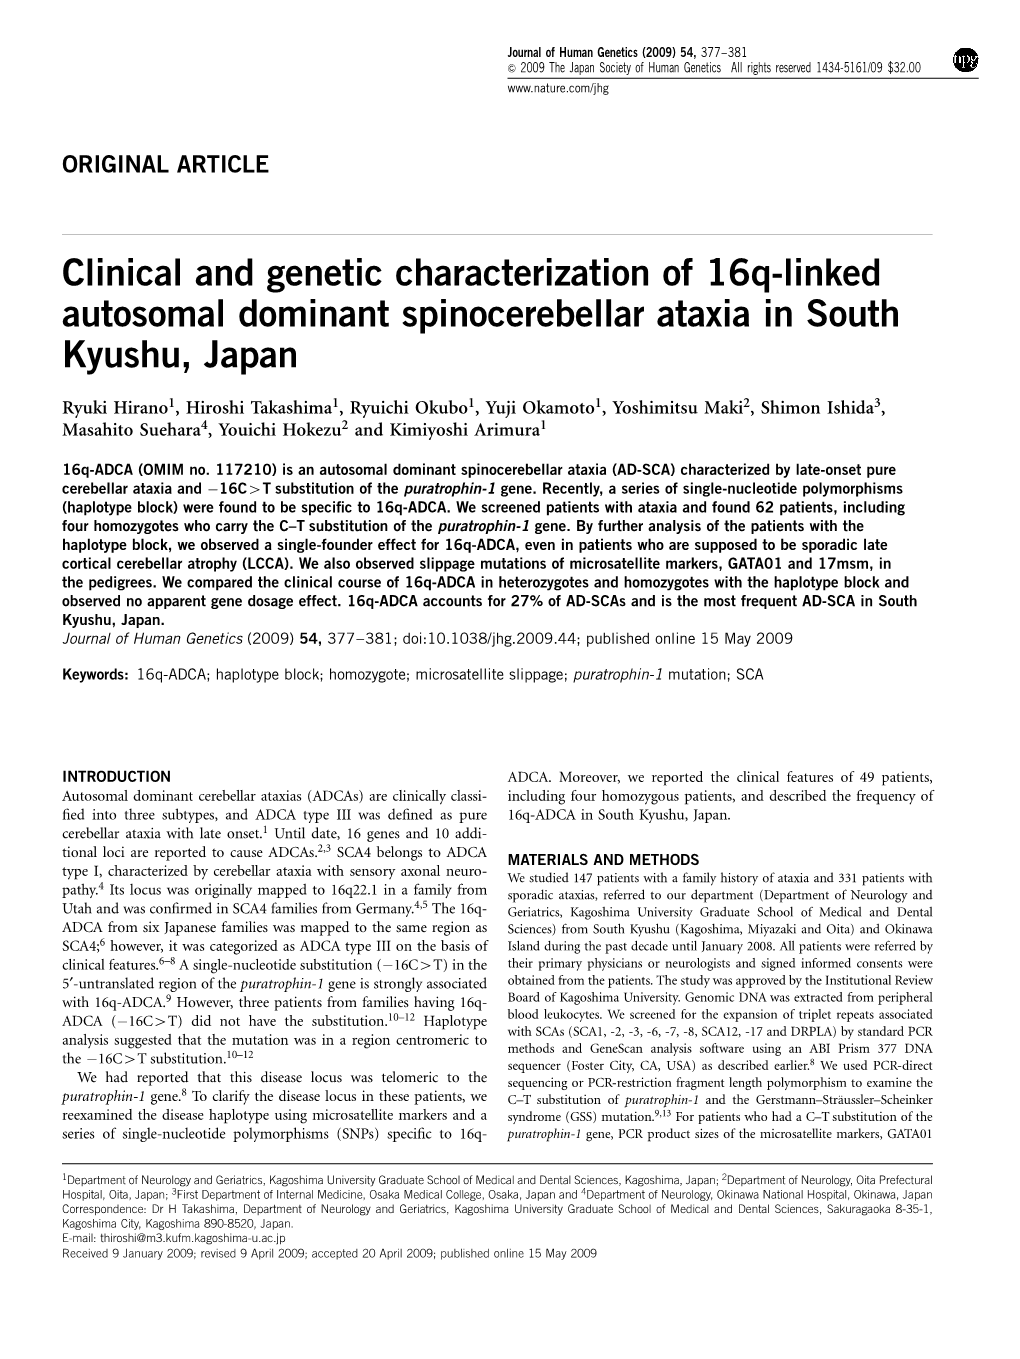 Clinical and Genetic Characterization of 16Q-Linked Autosomal Dominant Spinocerebellar Ataxia in South Kyushu, Japan